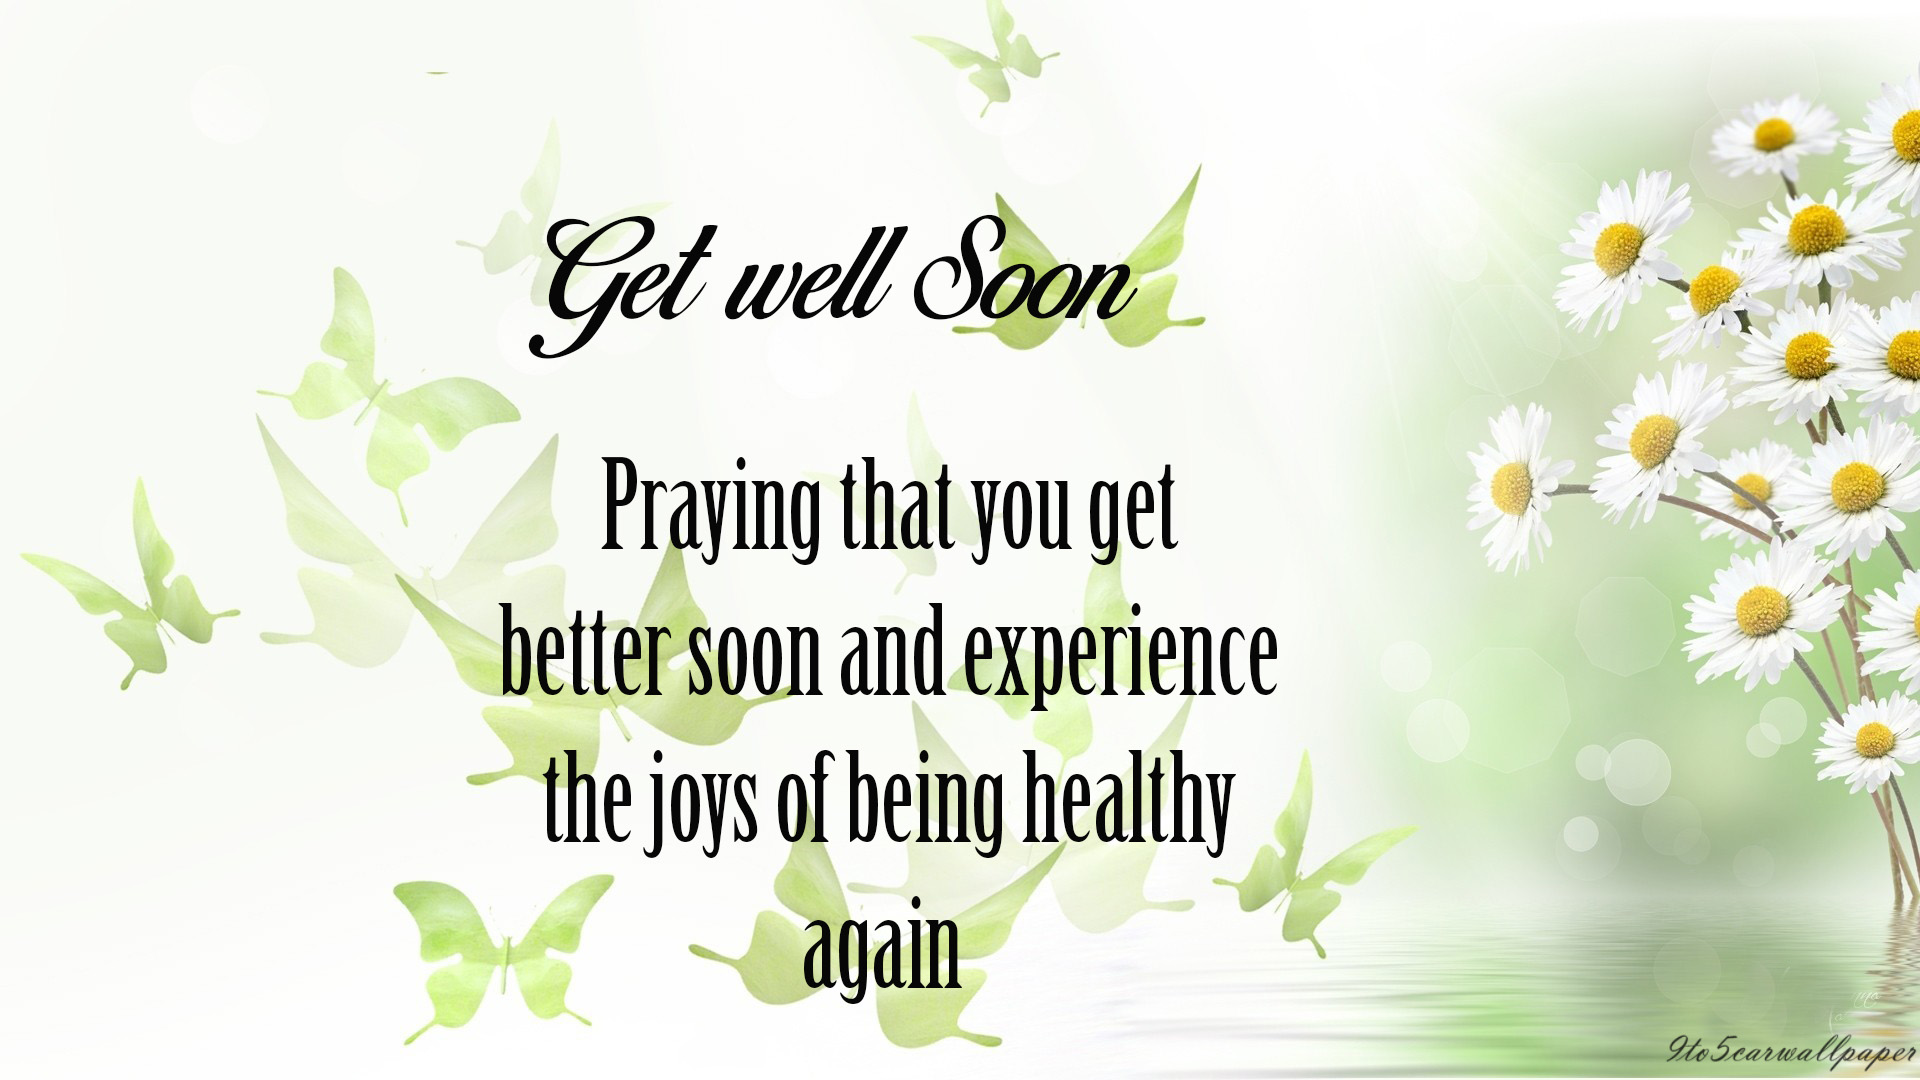 get-well-soon-quotes-wishes-images-2018